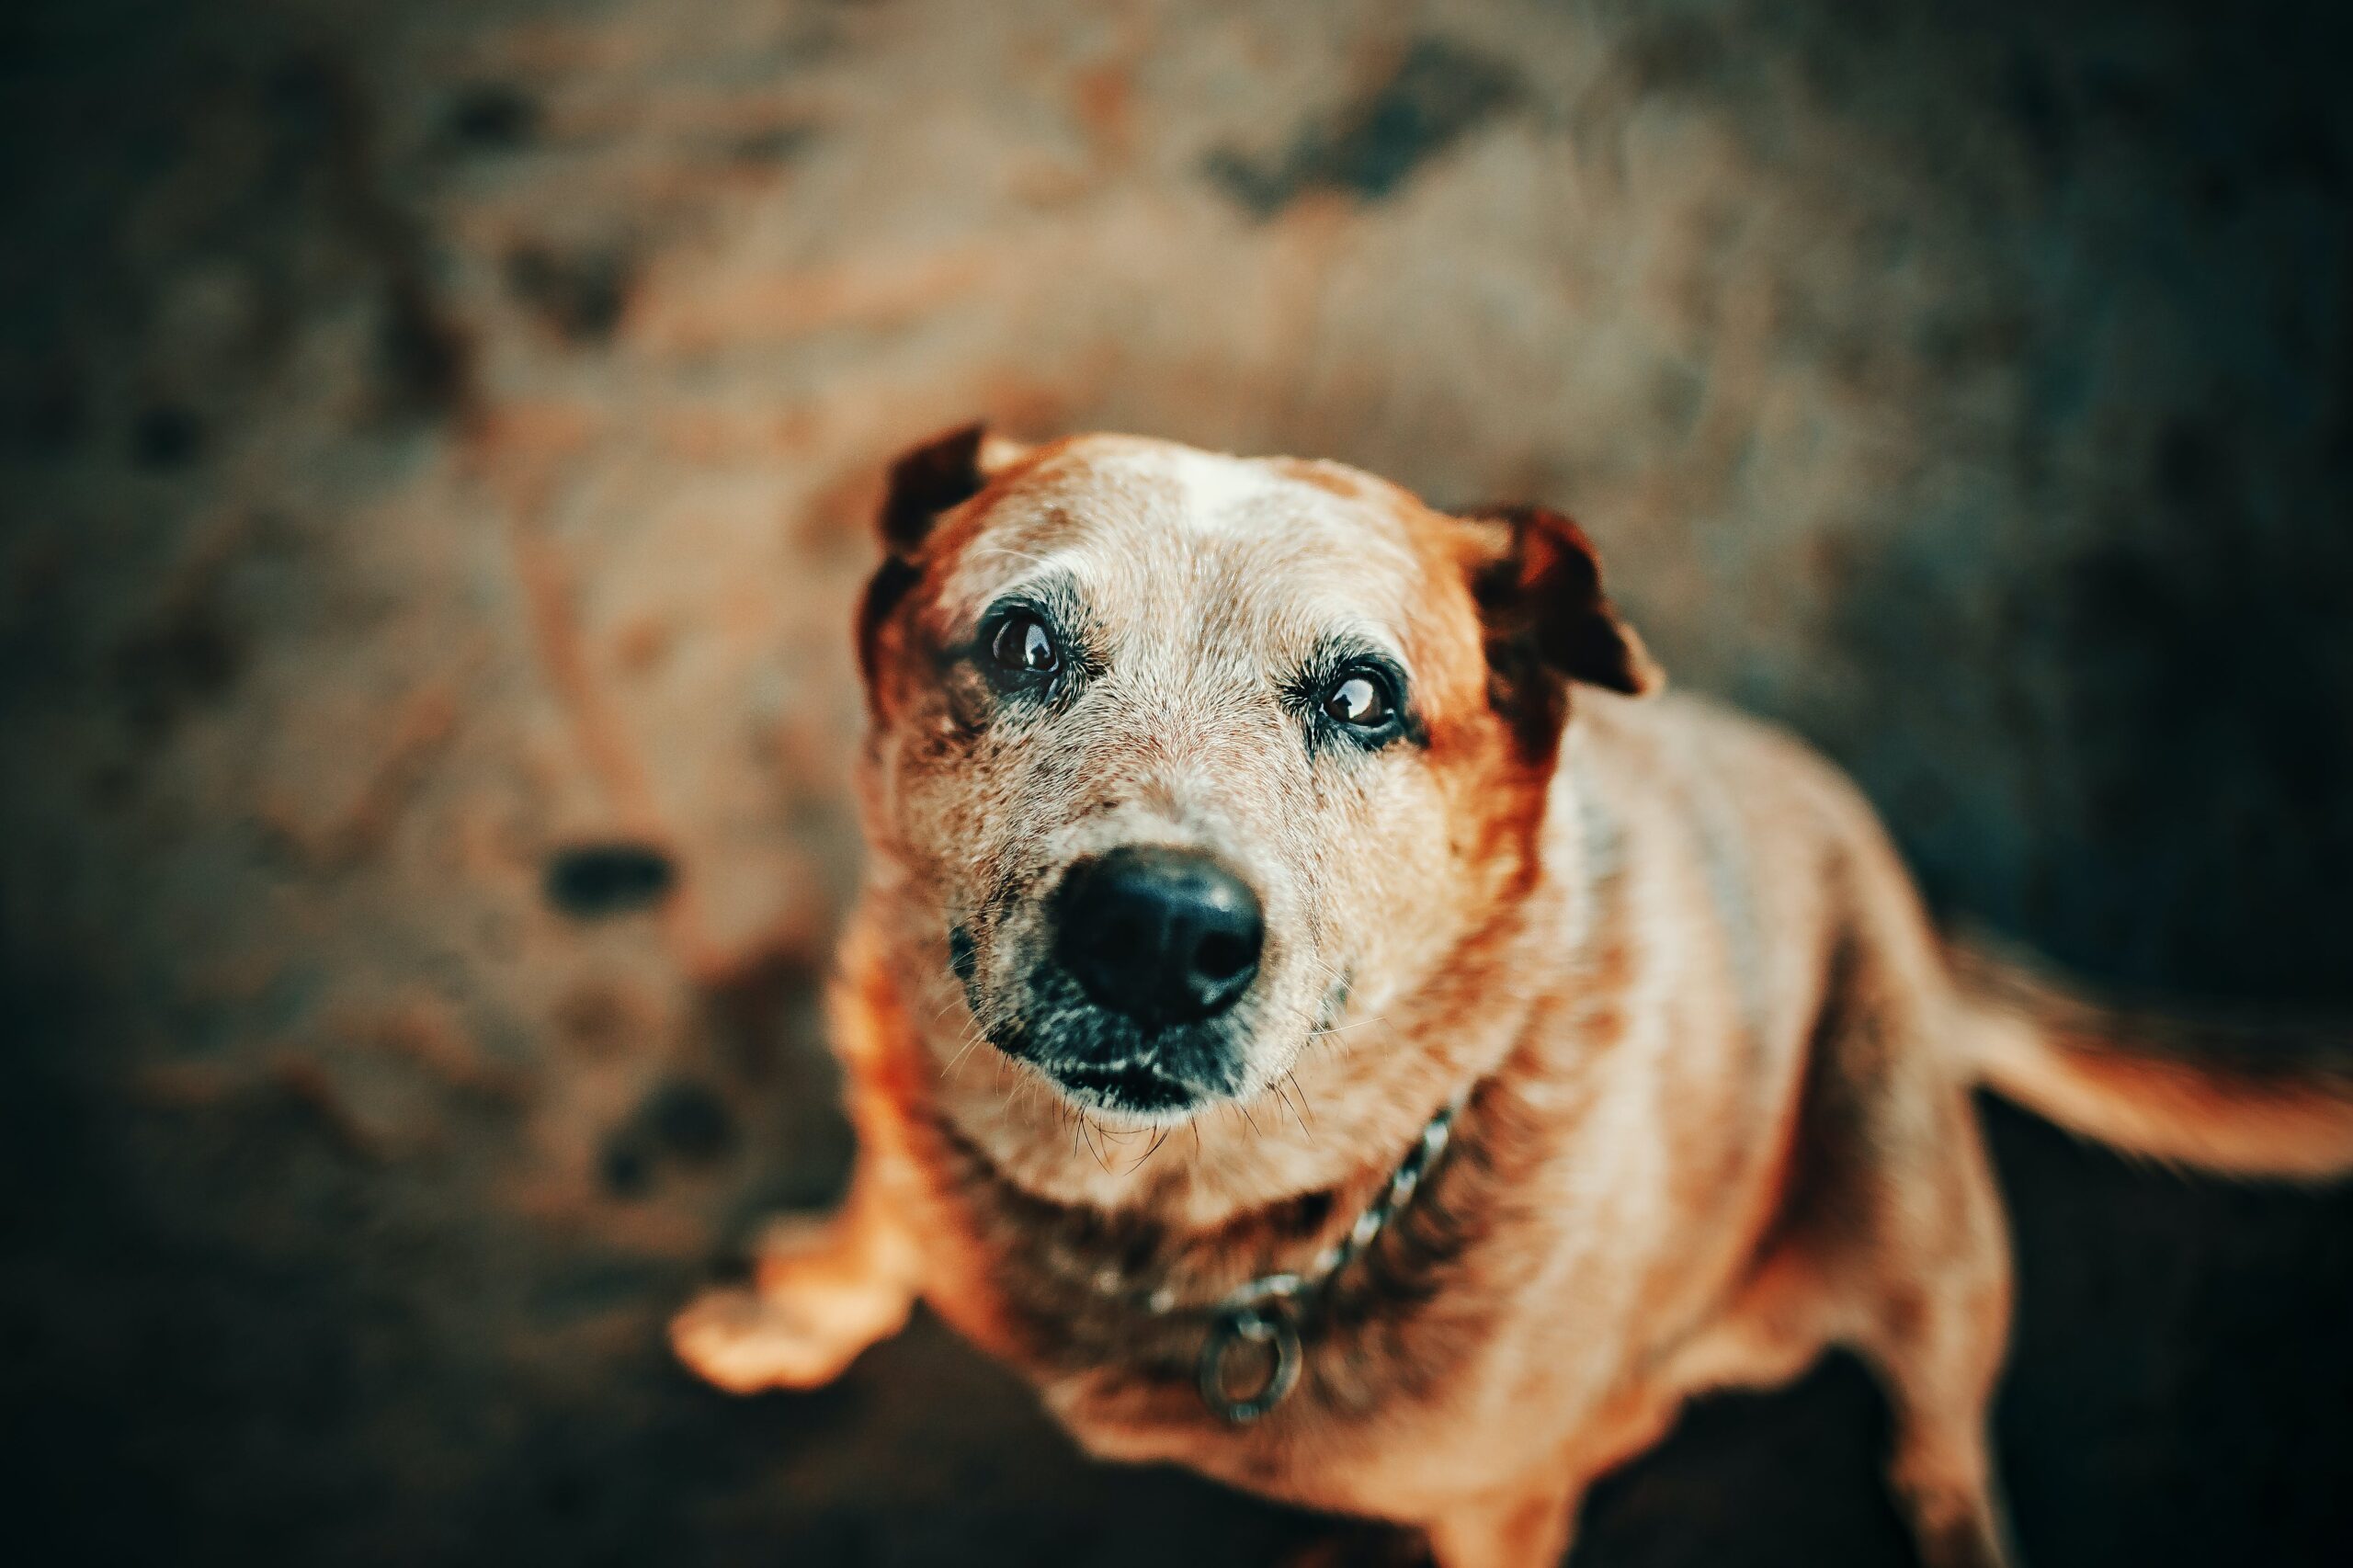 A senior dog with a white face looks at the camera